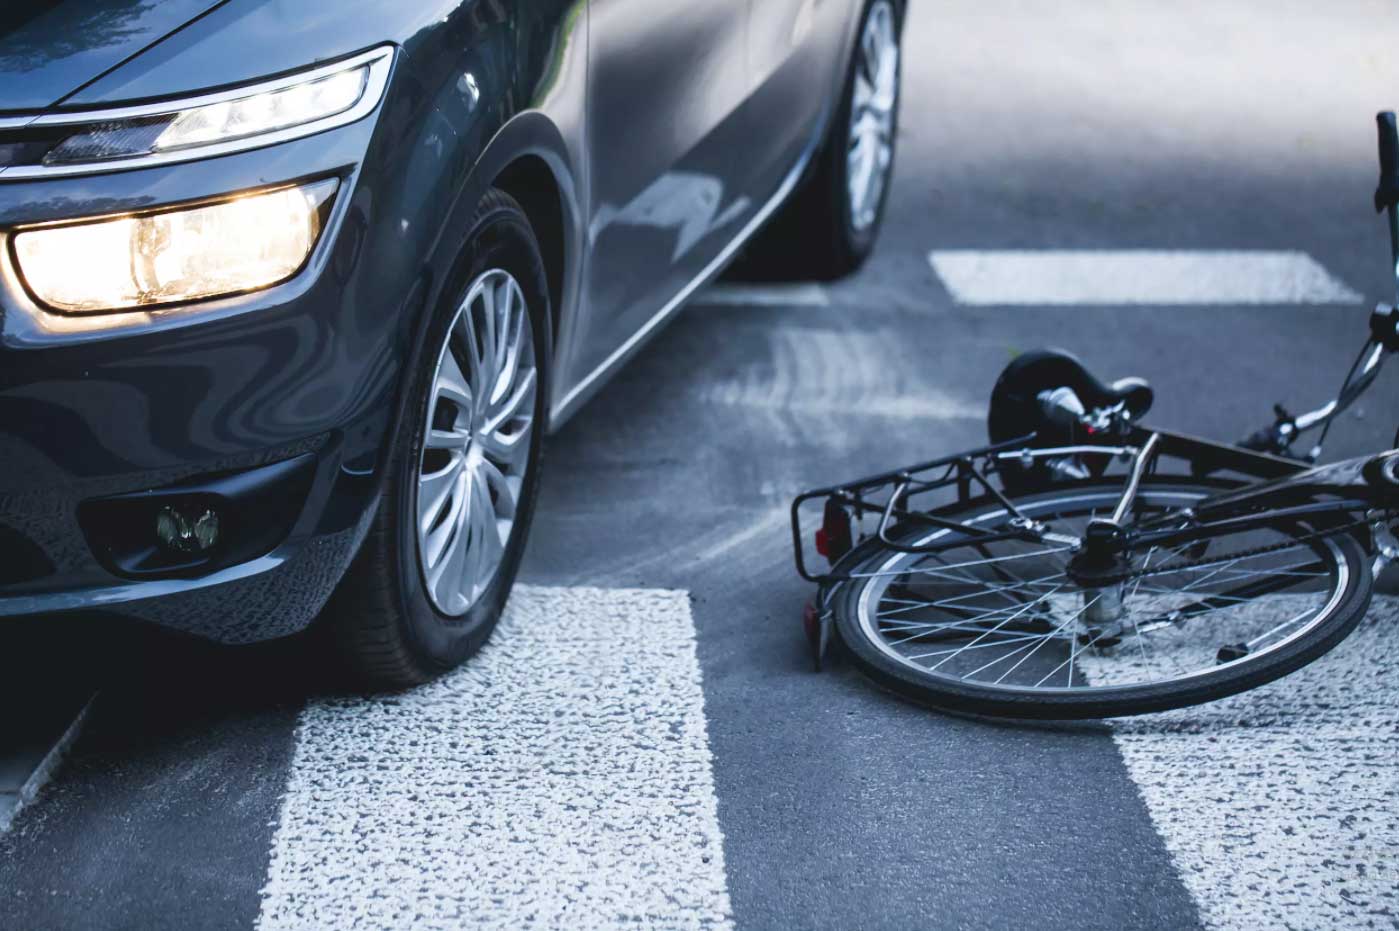 How can bicycles drive safely while driving near other vehicles?